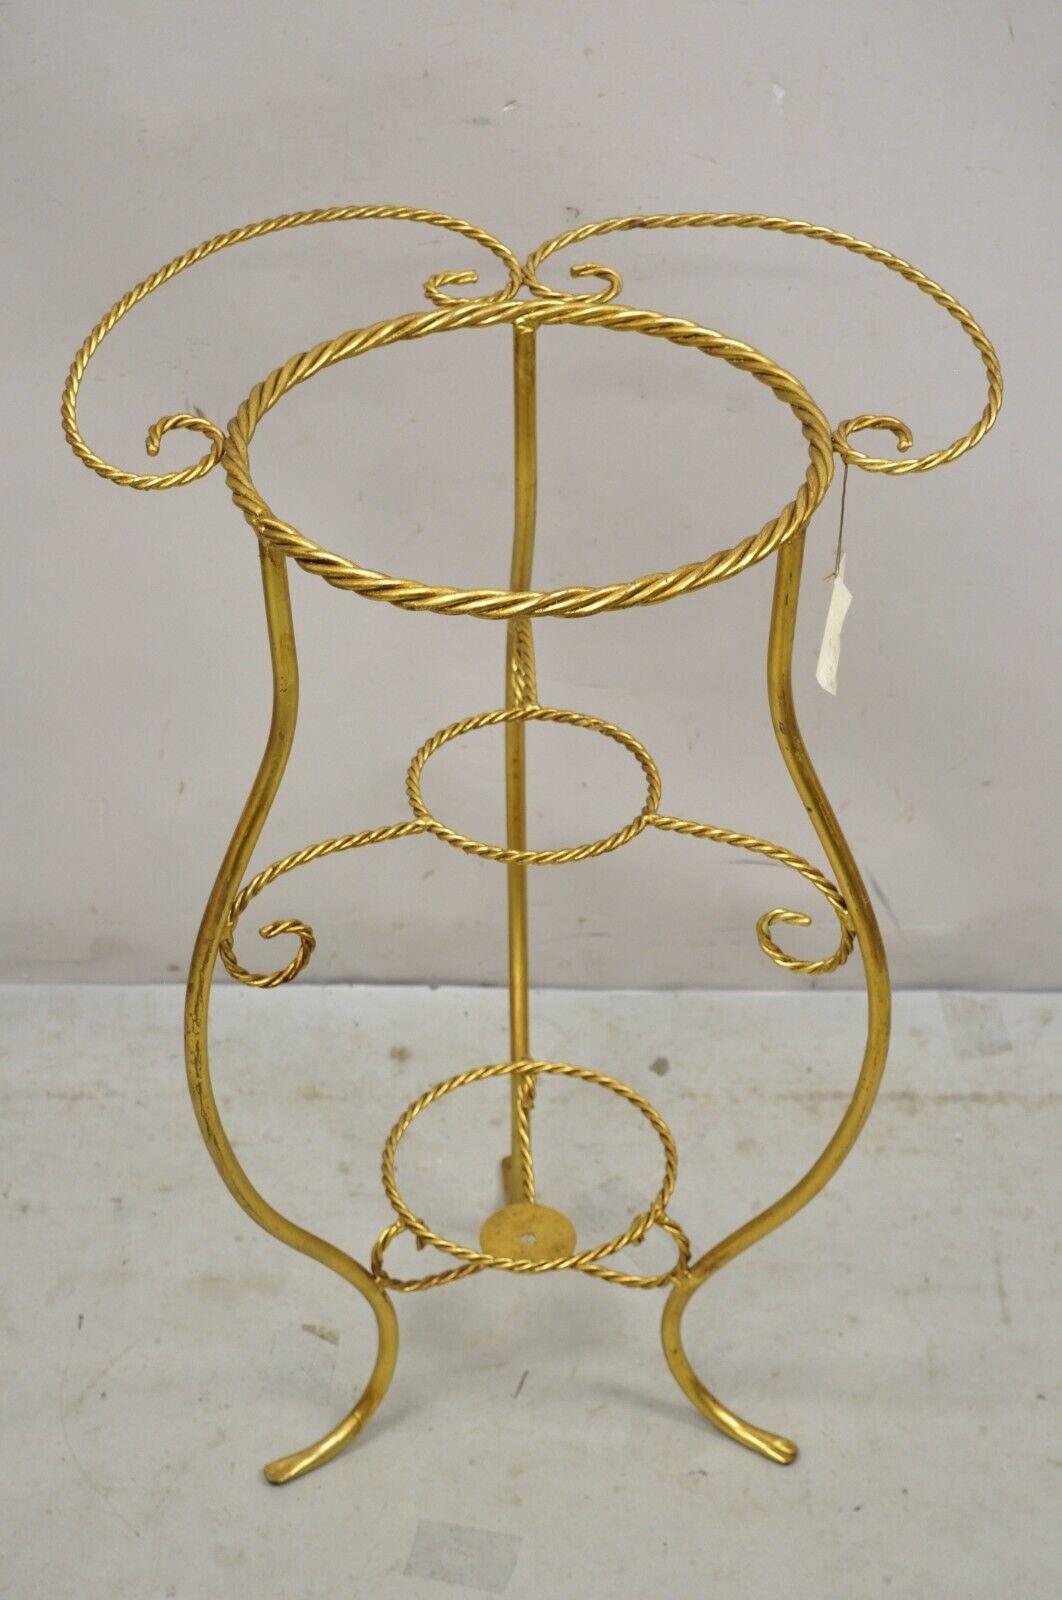 Vintage Italian Hollywood Regency Gold Iron Rope Form 2 Tier Bath Washstand Plant stand. Item featured has a (2) tier iron rope frame, washstand frame (example pictured), can also be used as a 2 tier plant stand, gold gilt finish, wrought iron